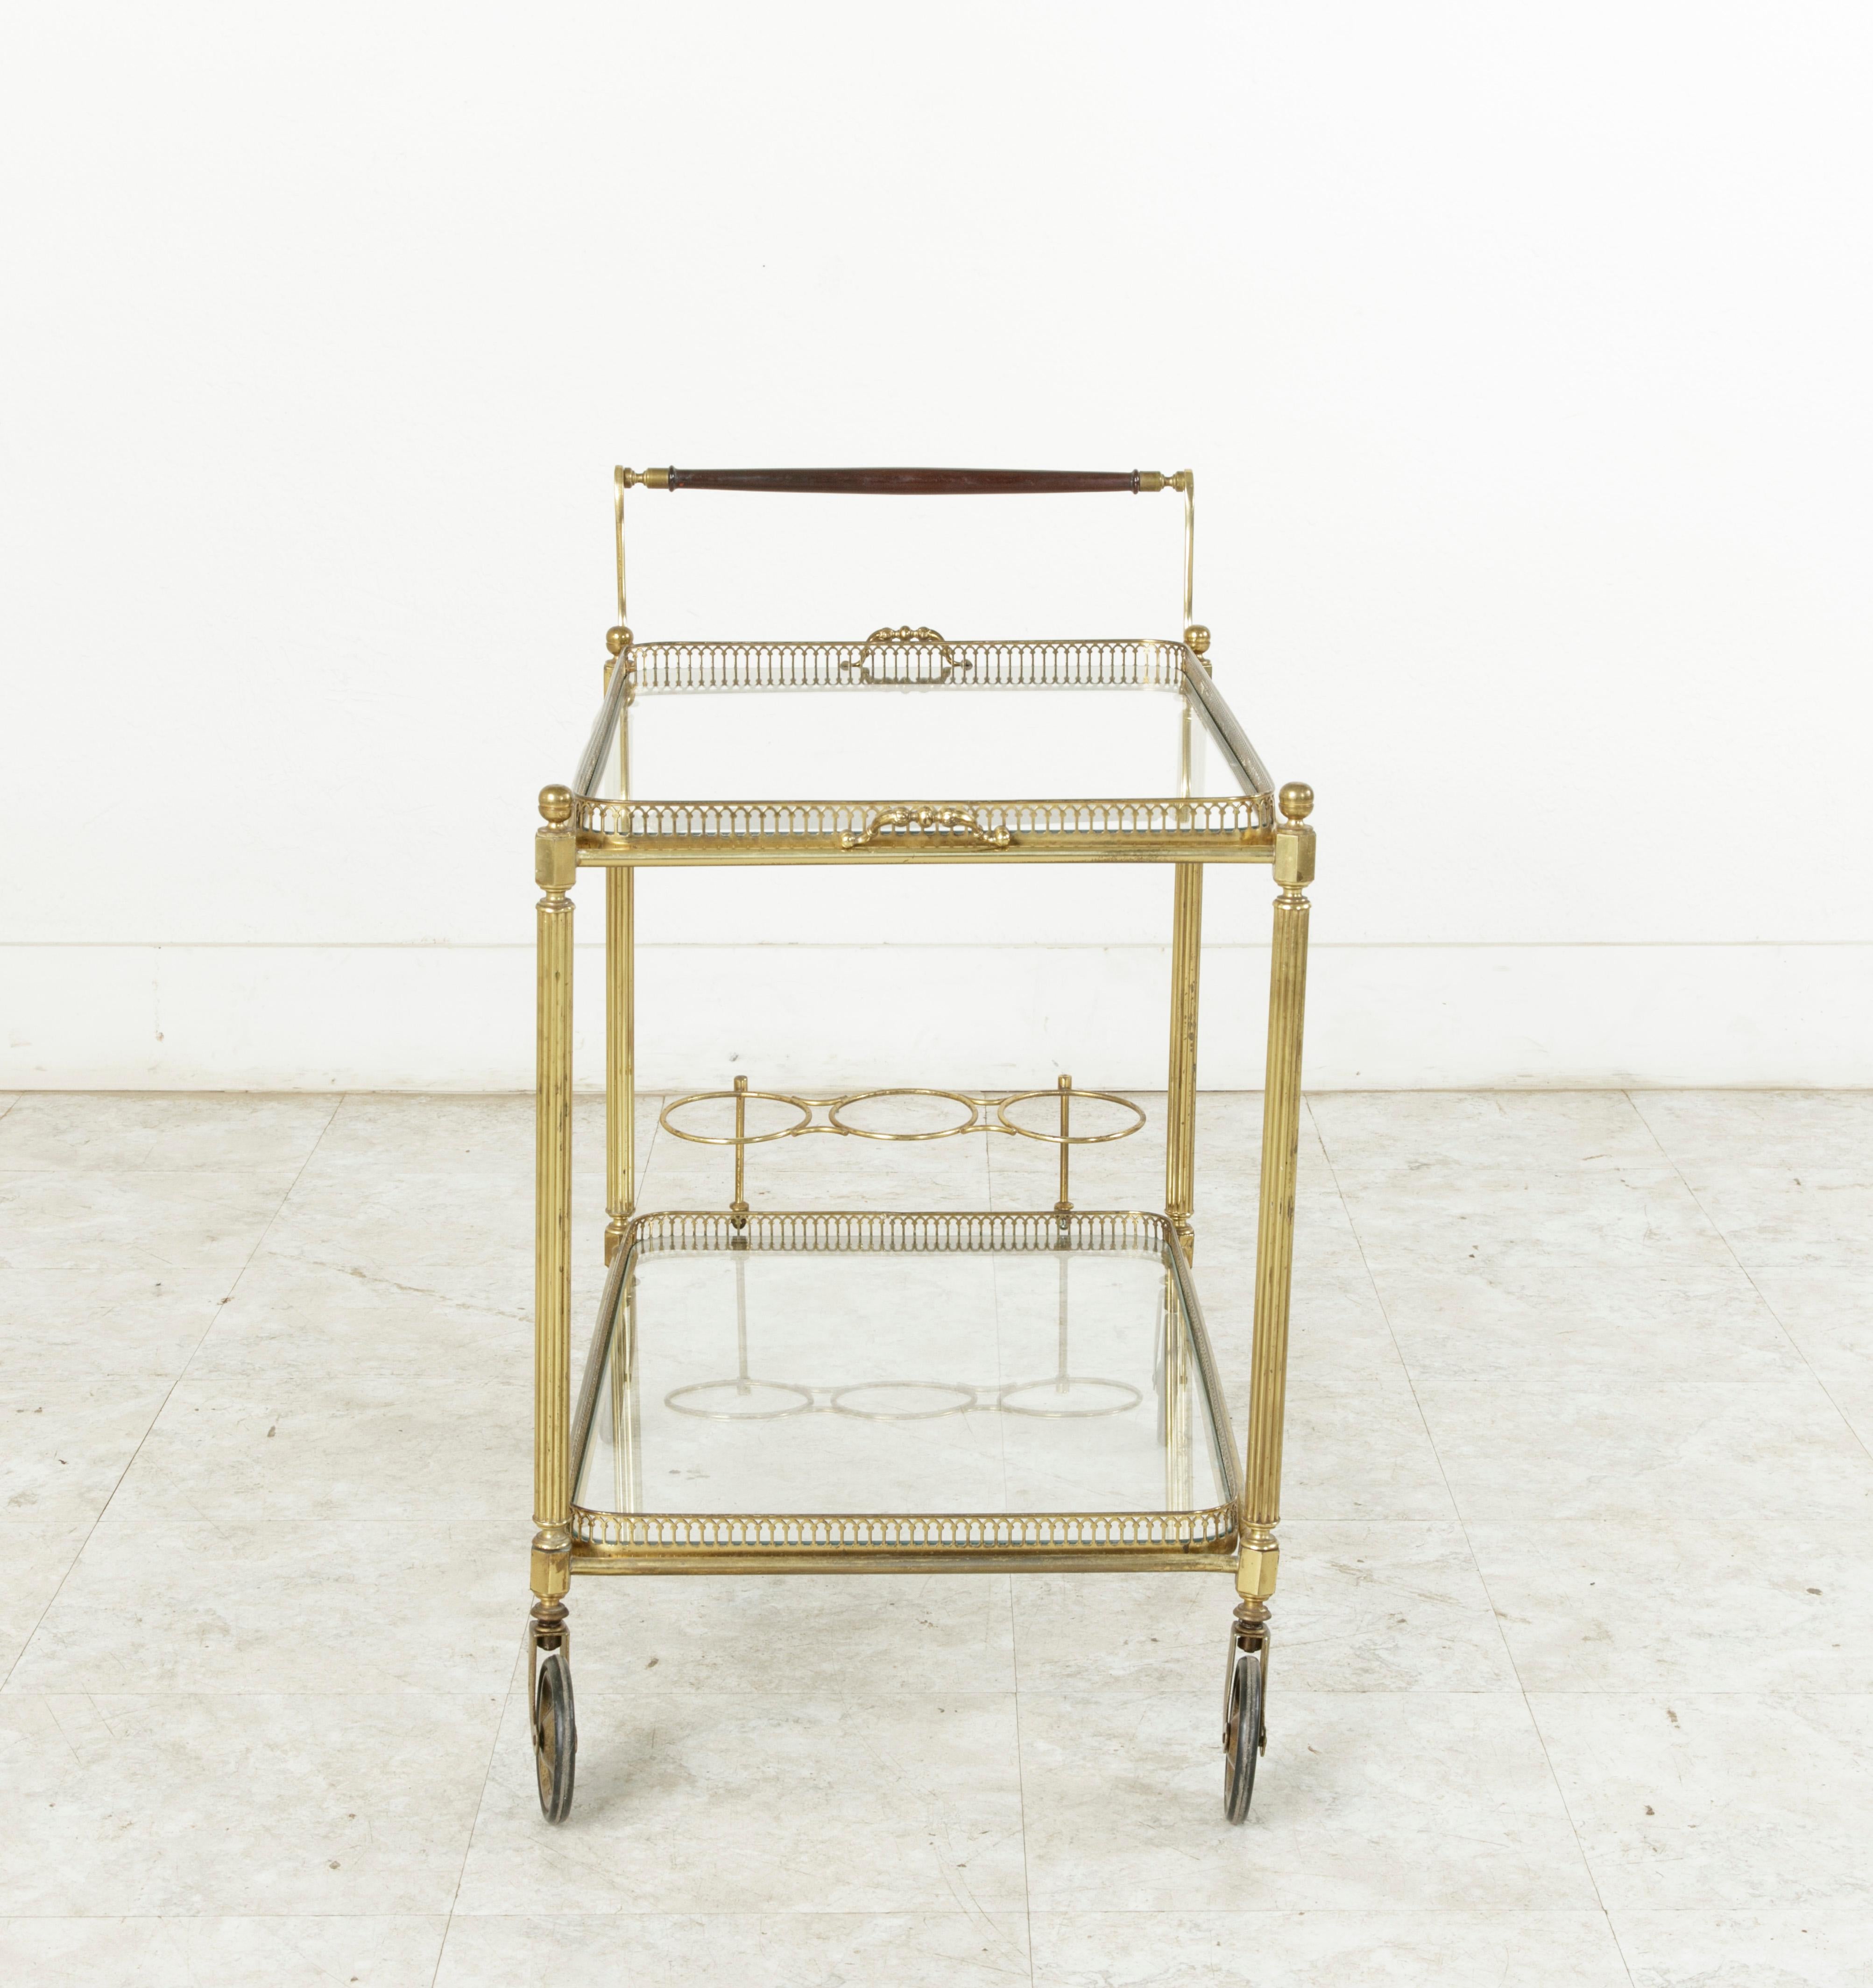 Midcentury French Brass Bar Cart with Mahogany Handle and Removable Tray (Moderne der Mitte des Jahrhunderts)